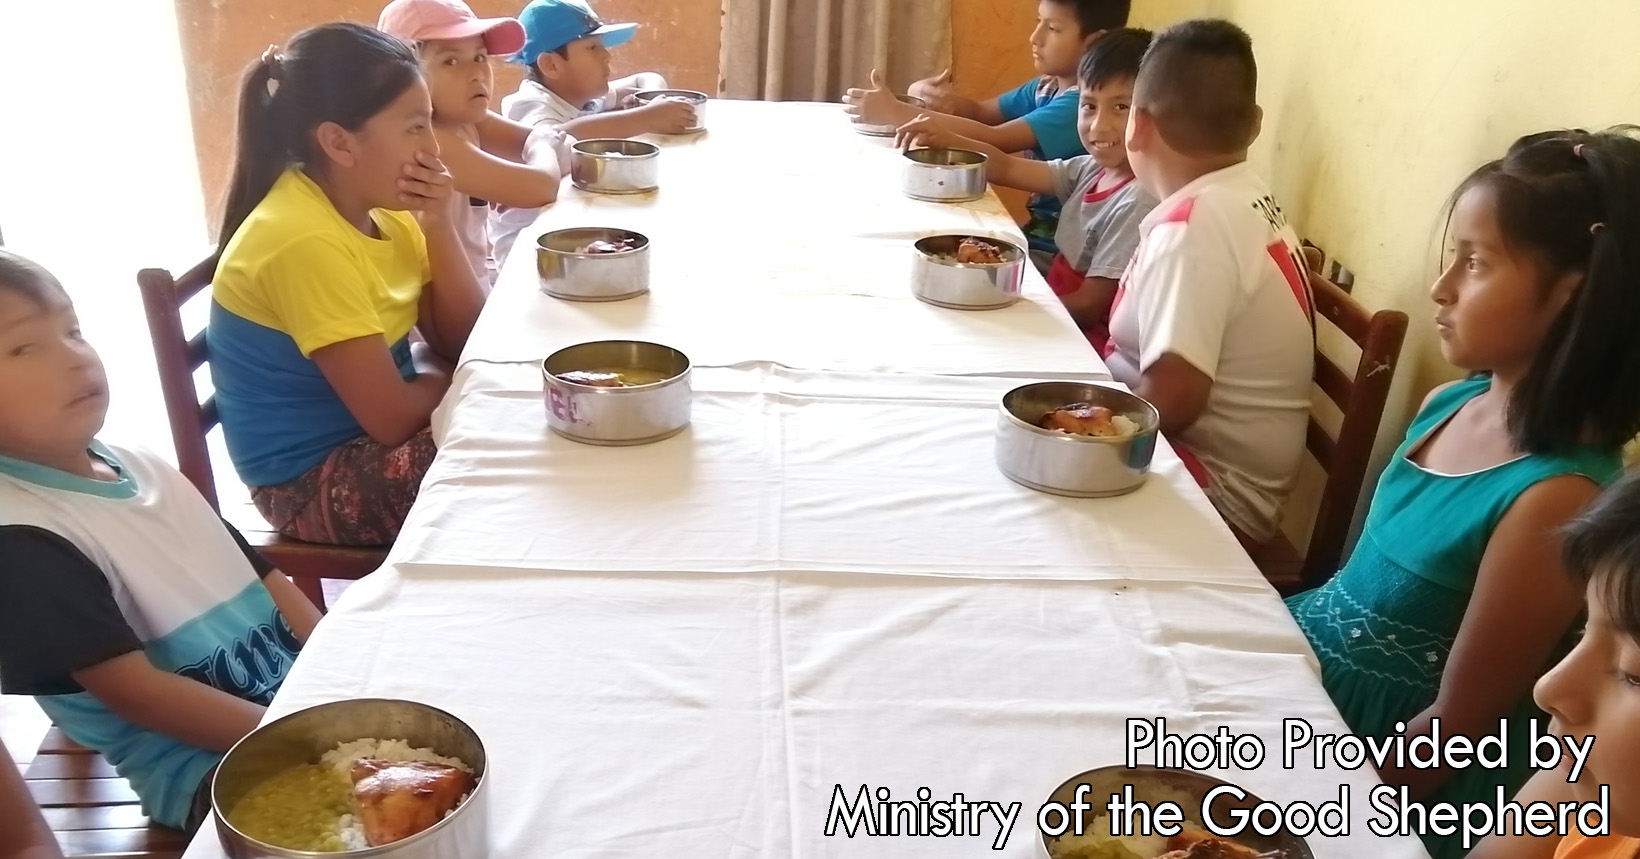 After doing their studies the children gather around to enjoy some food. In their bowl, the kids will be eating rice and chicken. The Ministry of The Good Shepard makes sure that the children's appetite is taken care of.